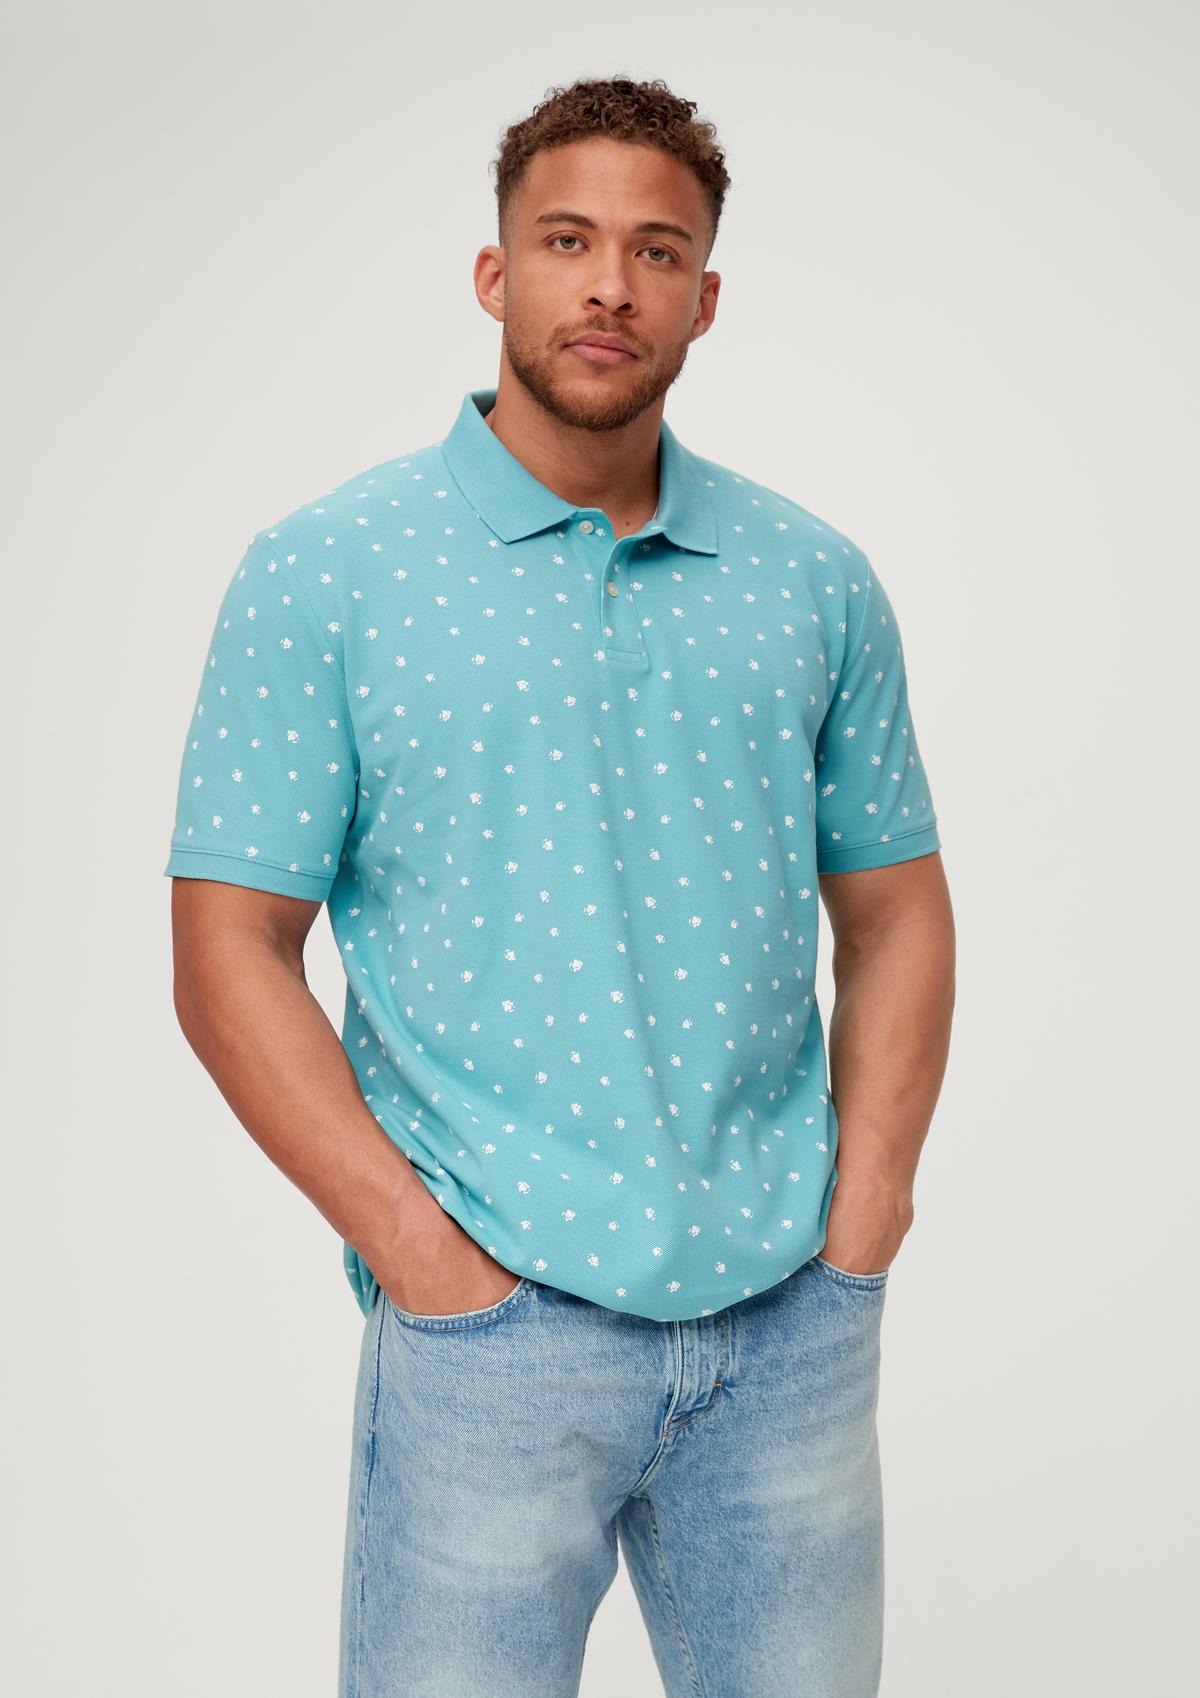 s.Oliver Polo shirt with a minimalist print